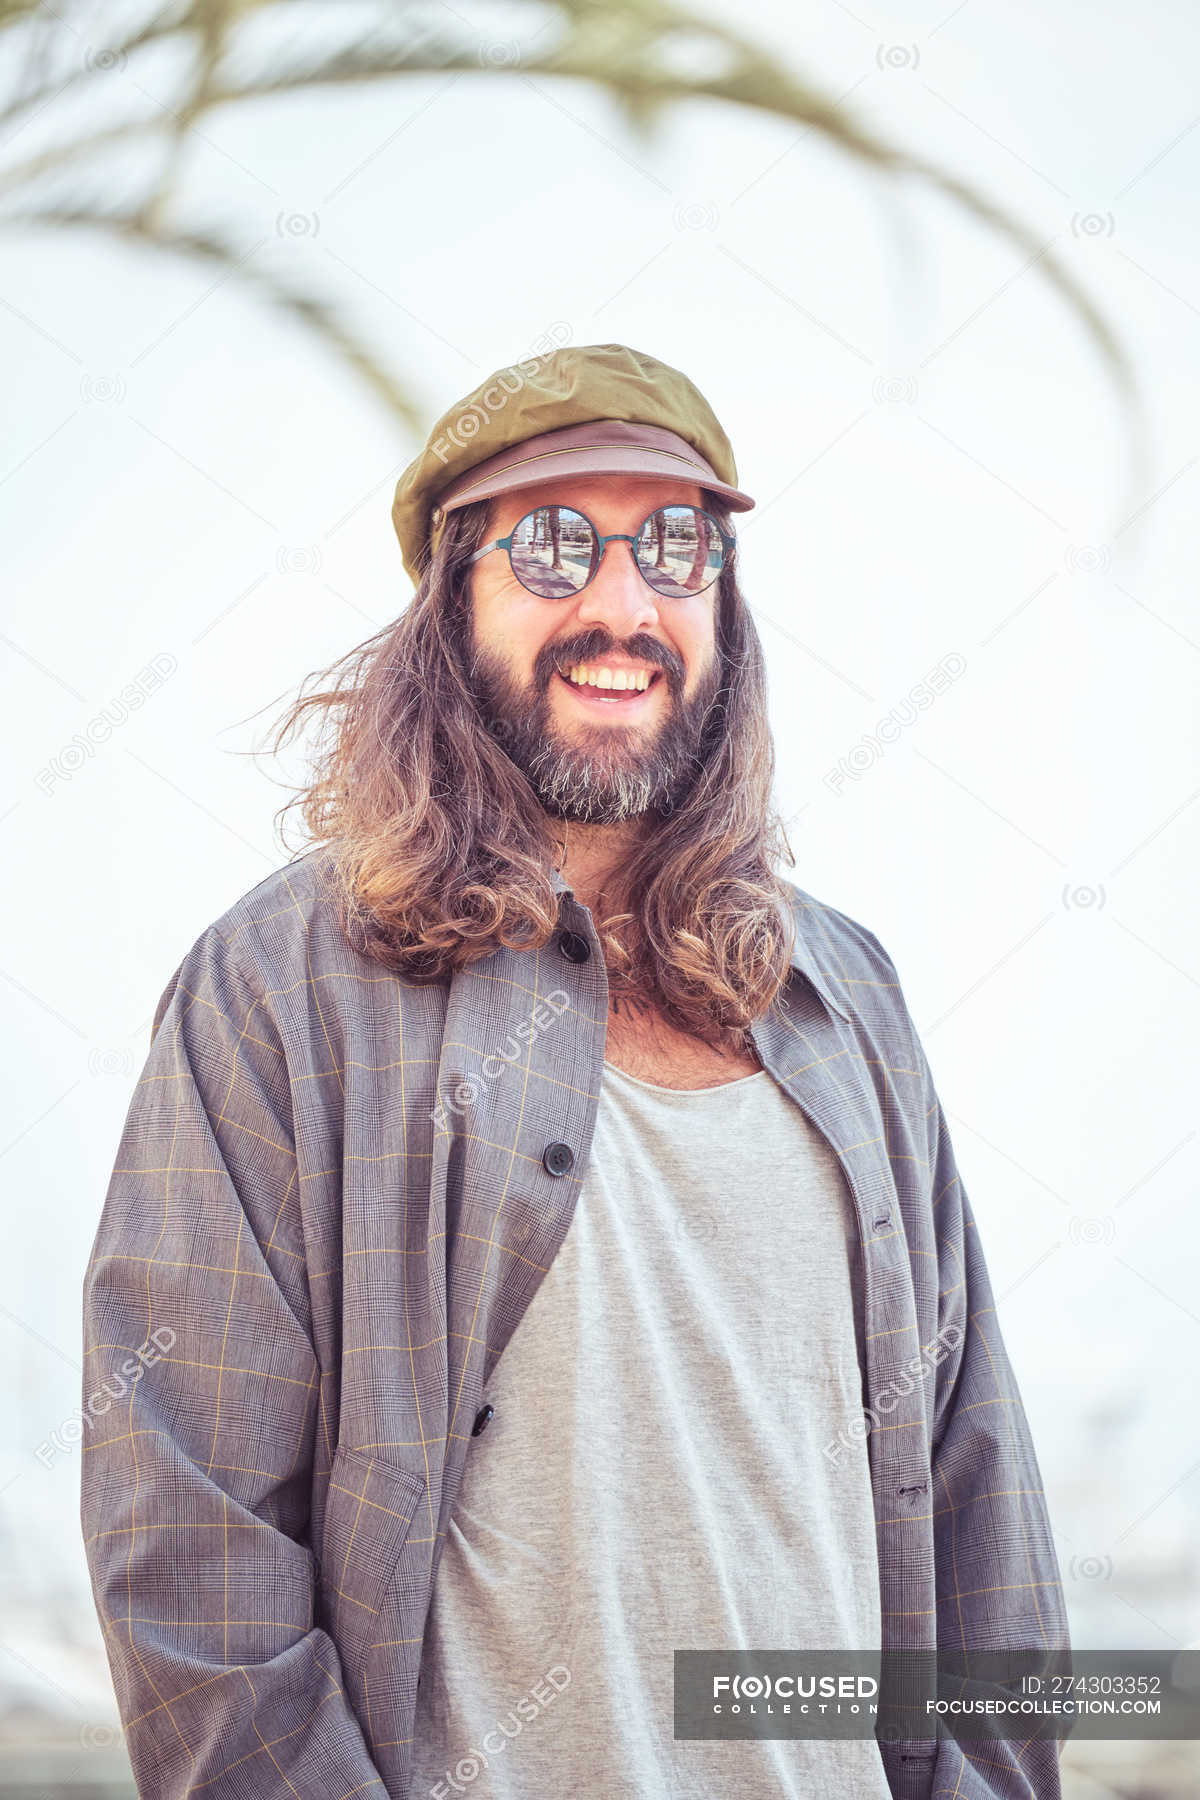 Stylish smiling bearded man with long hair posing on street — handsome,  hipster - Stock Photo | #274303352